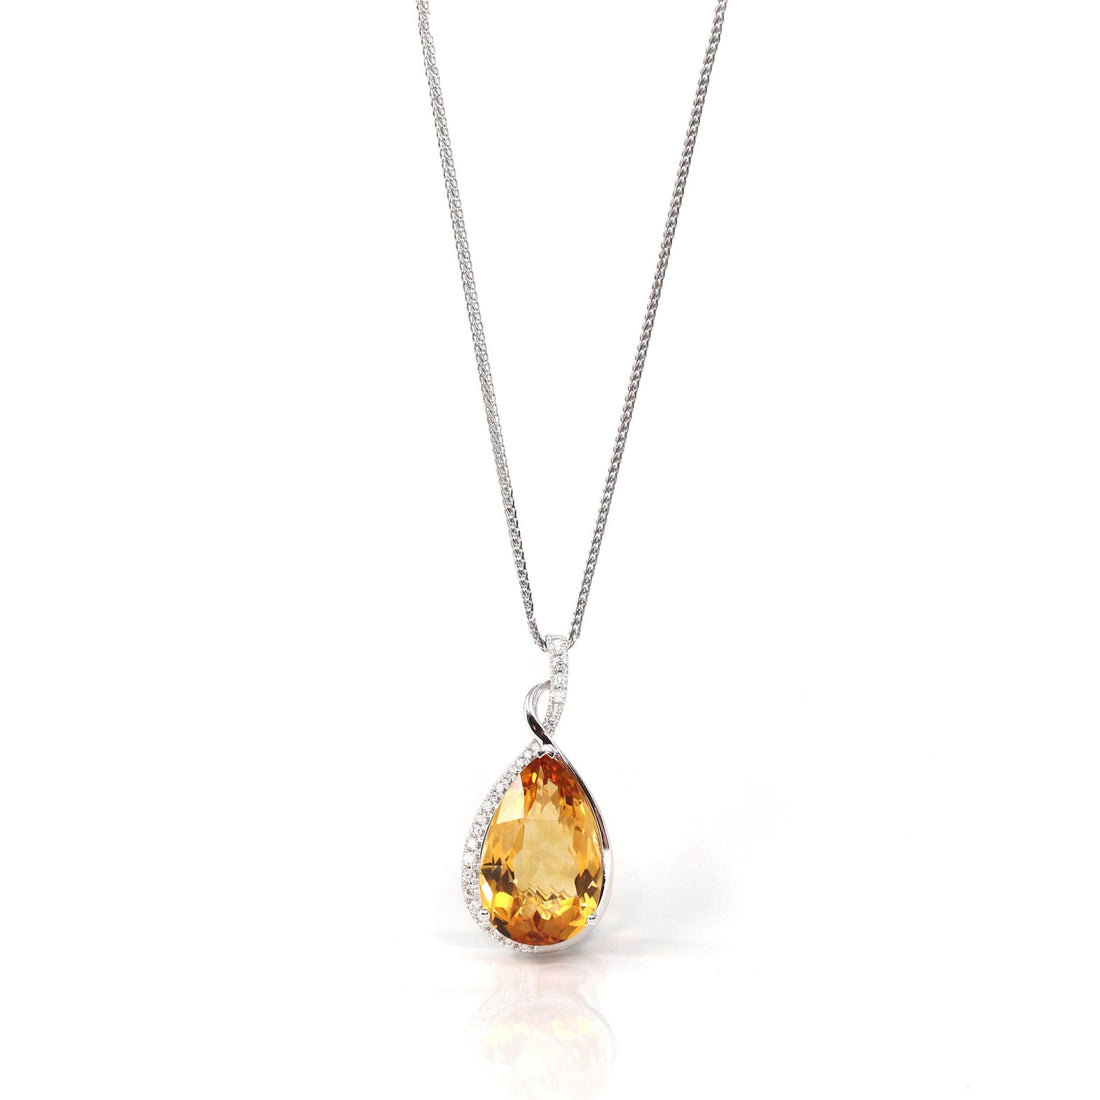 Baikalla Jewelry Gemstone Pendant Necklace Pendant Only 14k White Gold AAA Citrine Tear Drop Necklace with Diamonds